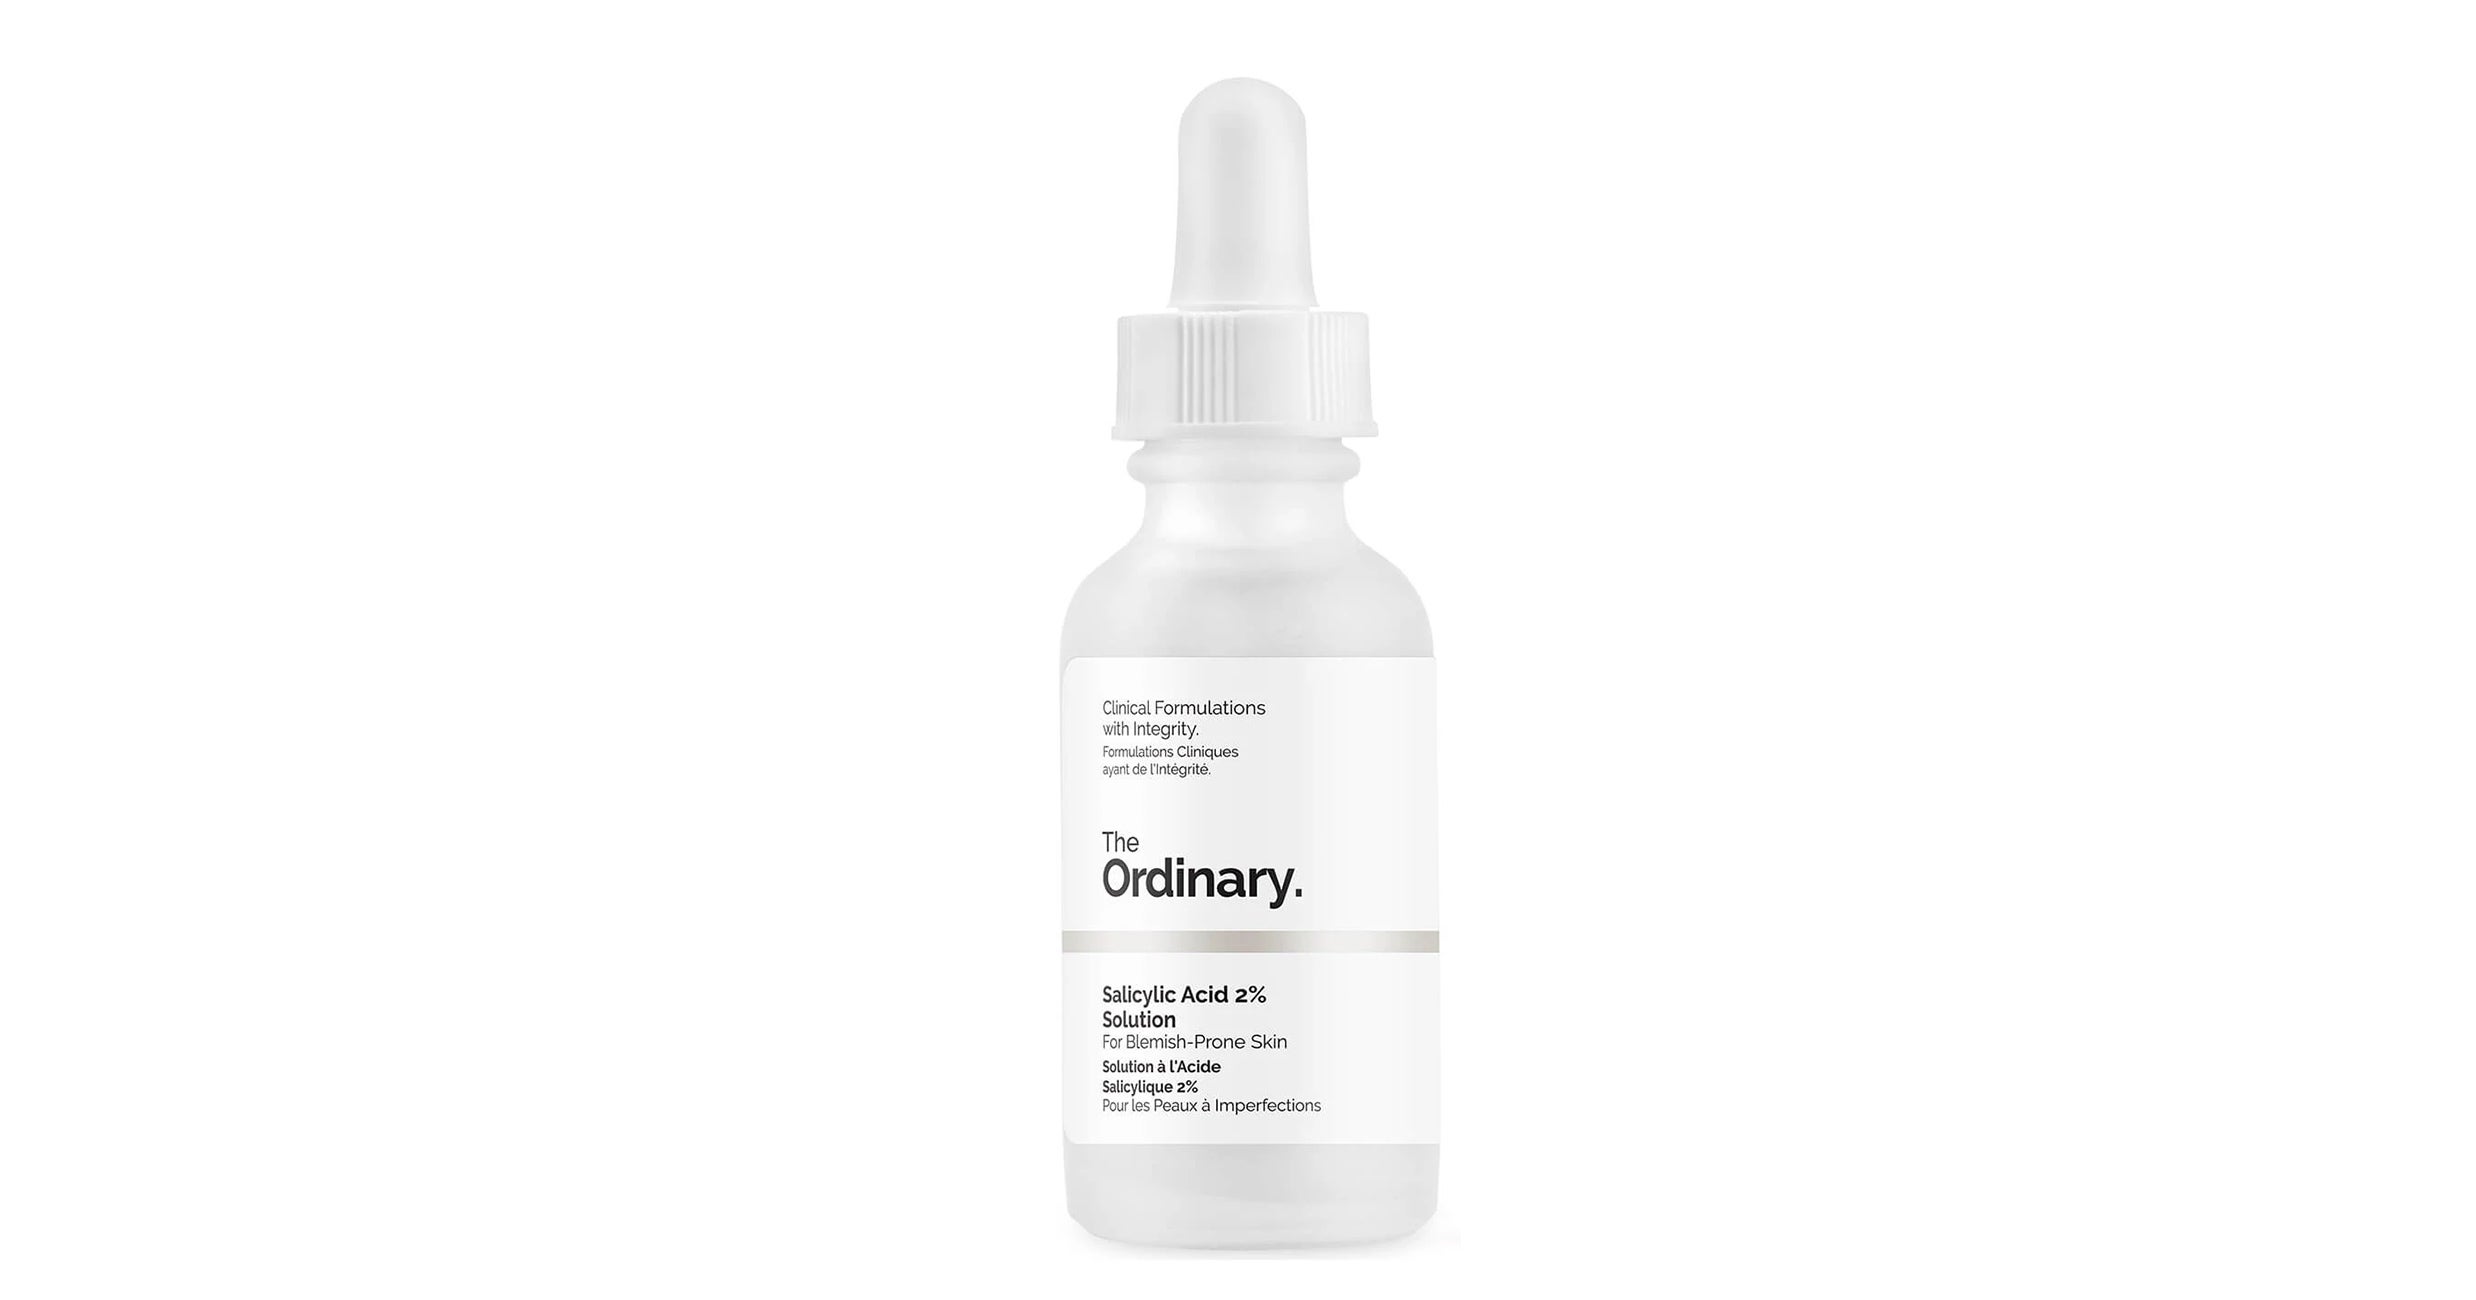 The Ordinary’s Most Popular Acne Serum Is Back In Stock